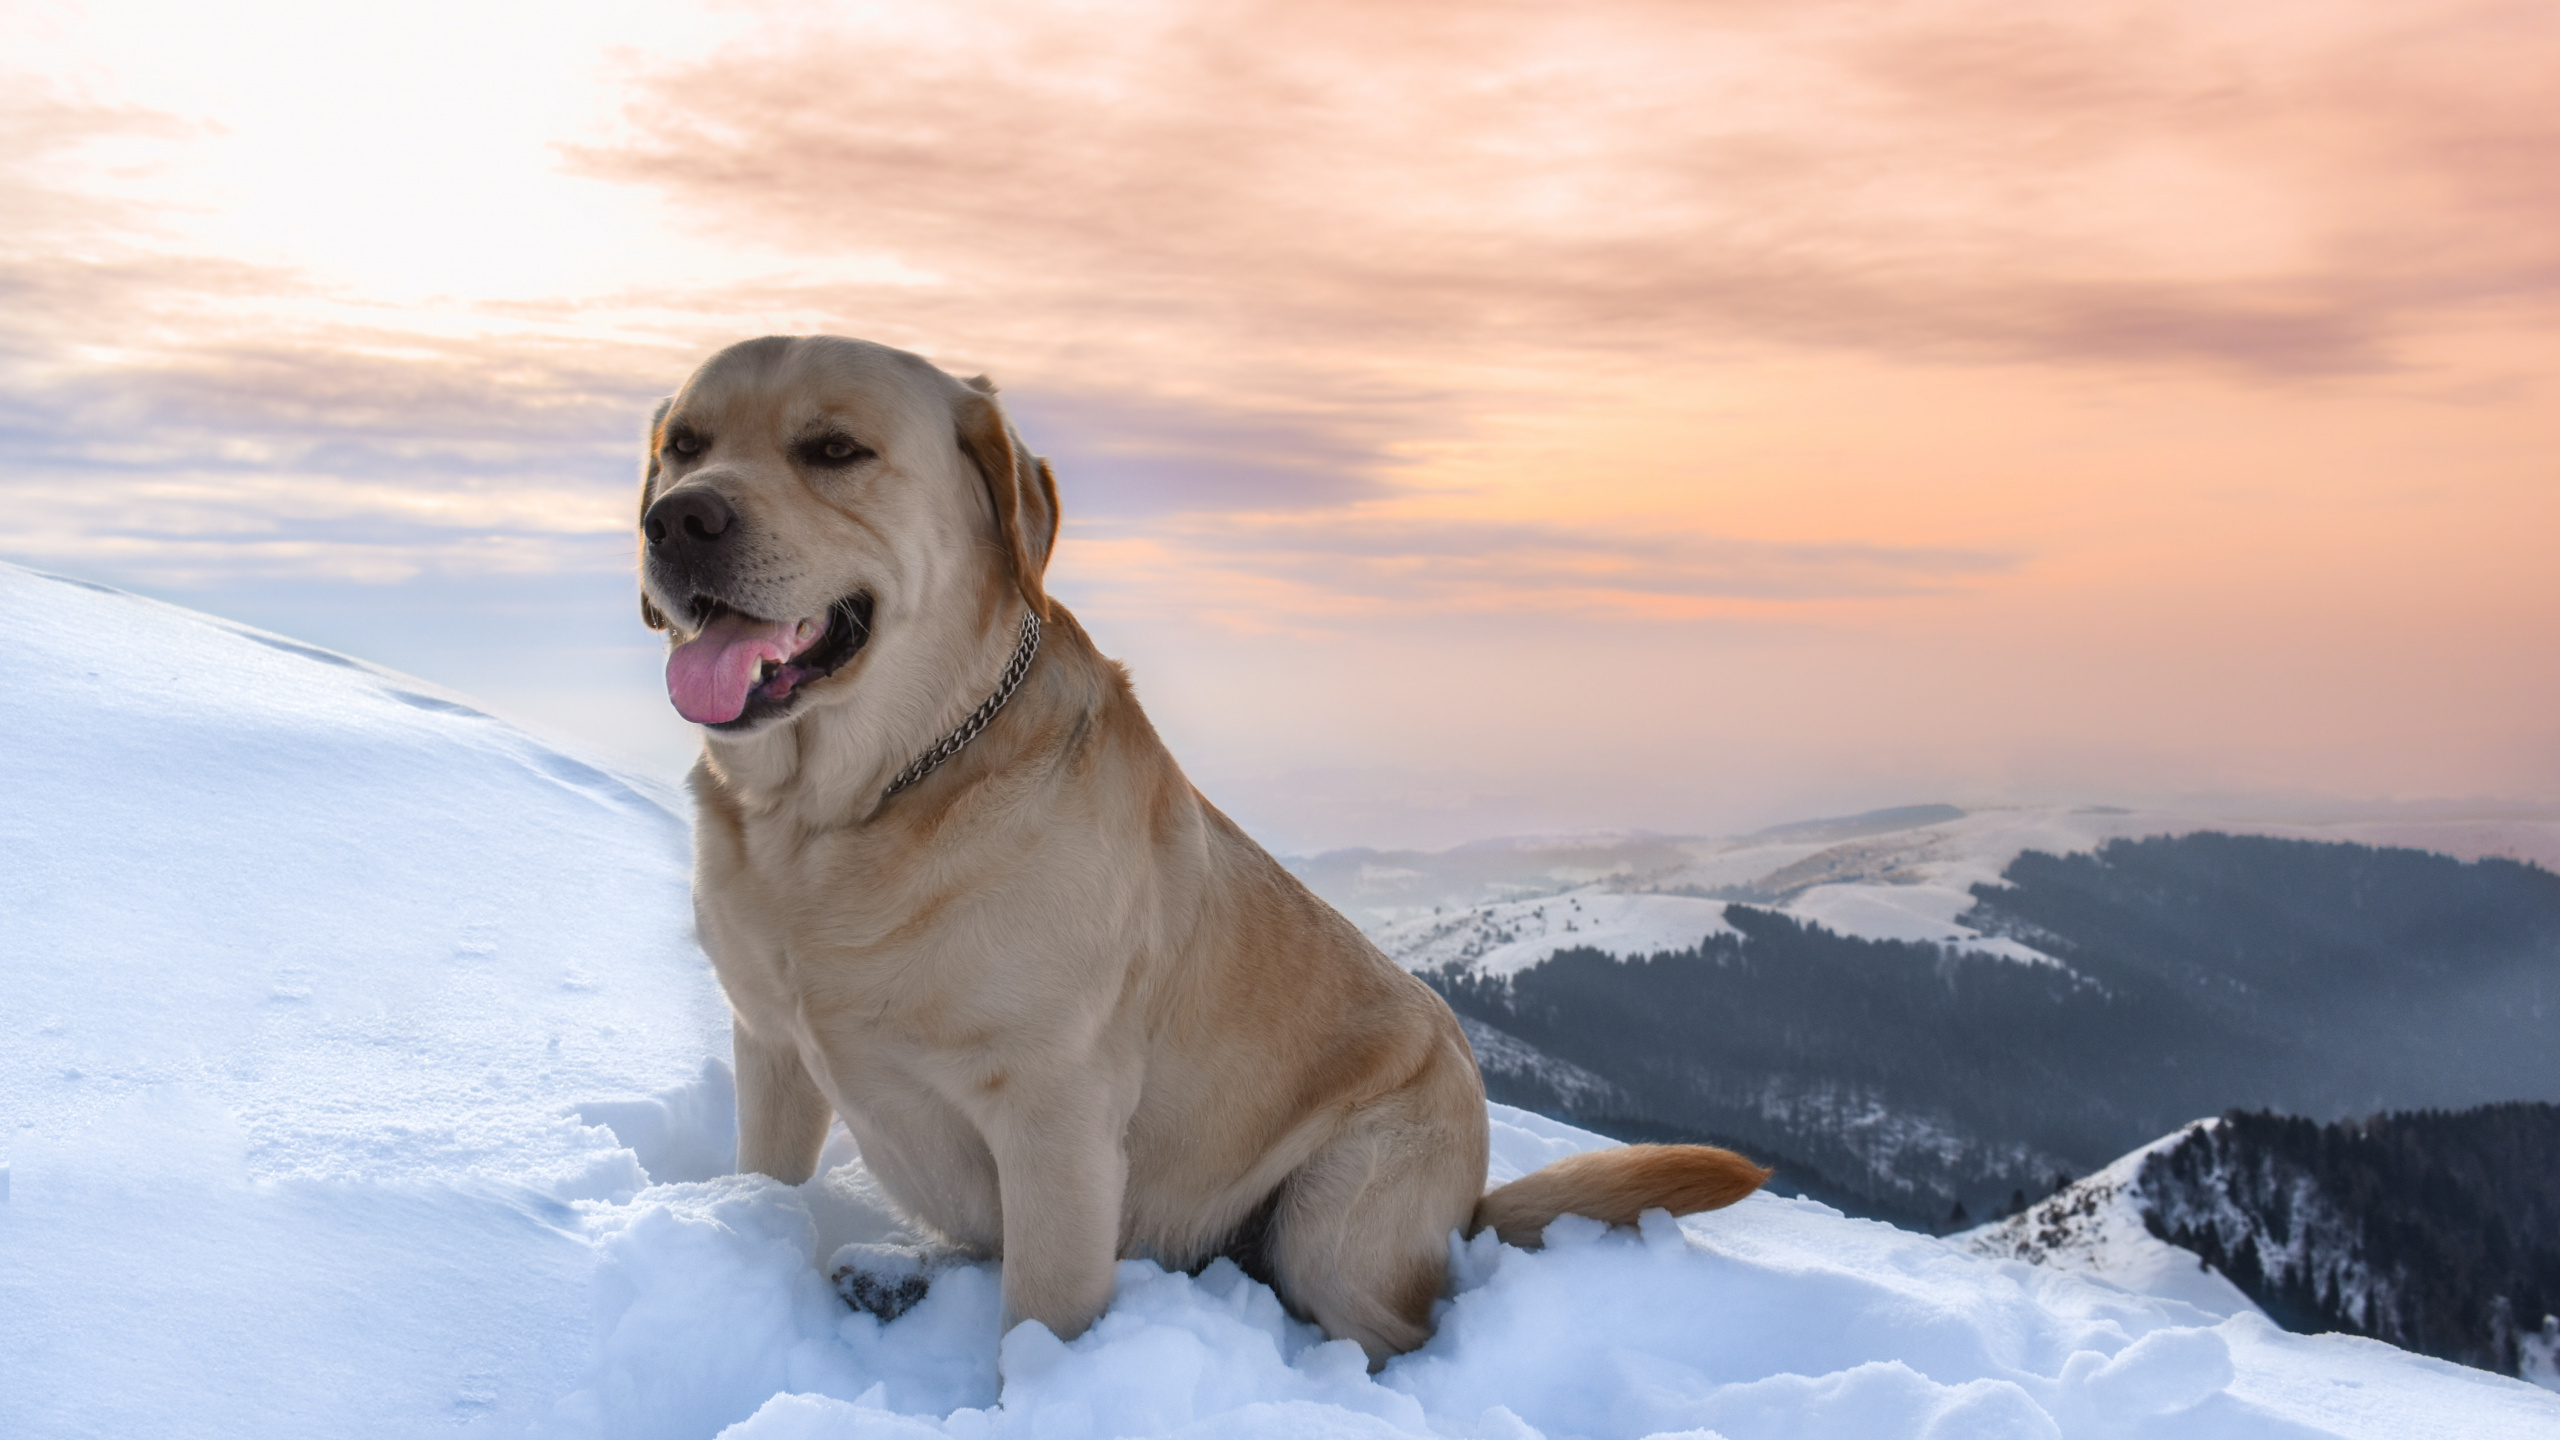 Brown Short Coated Dog on Snow Covered Ground During Daytime. Wallpaper in 2560x1440 Resolution